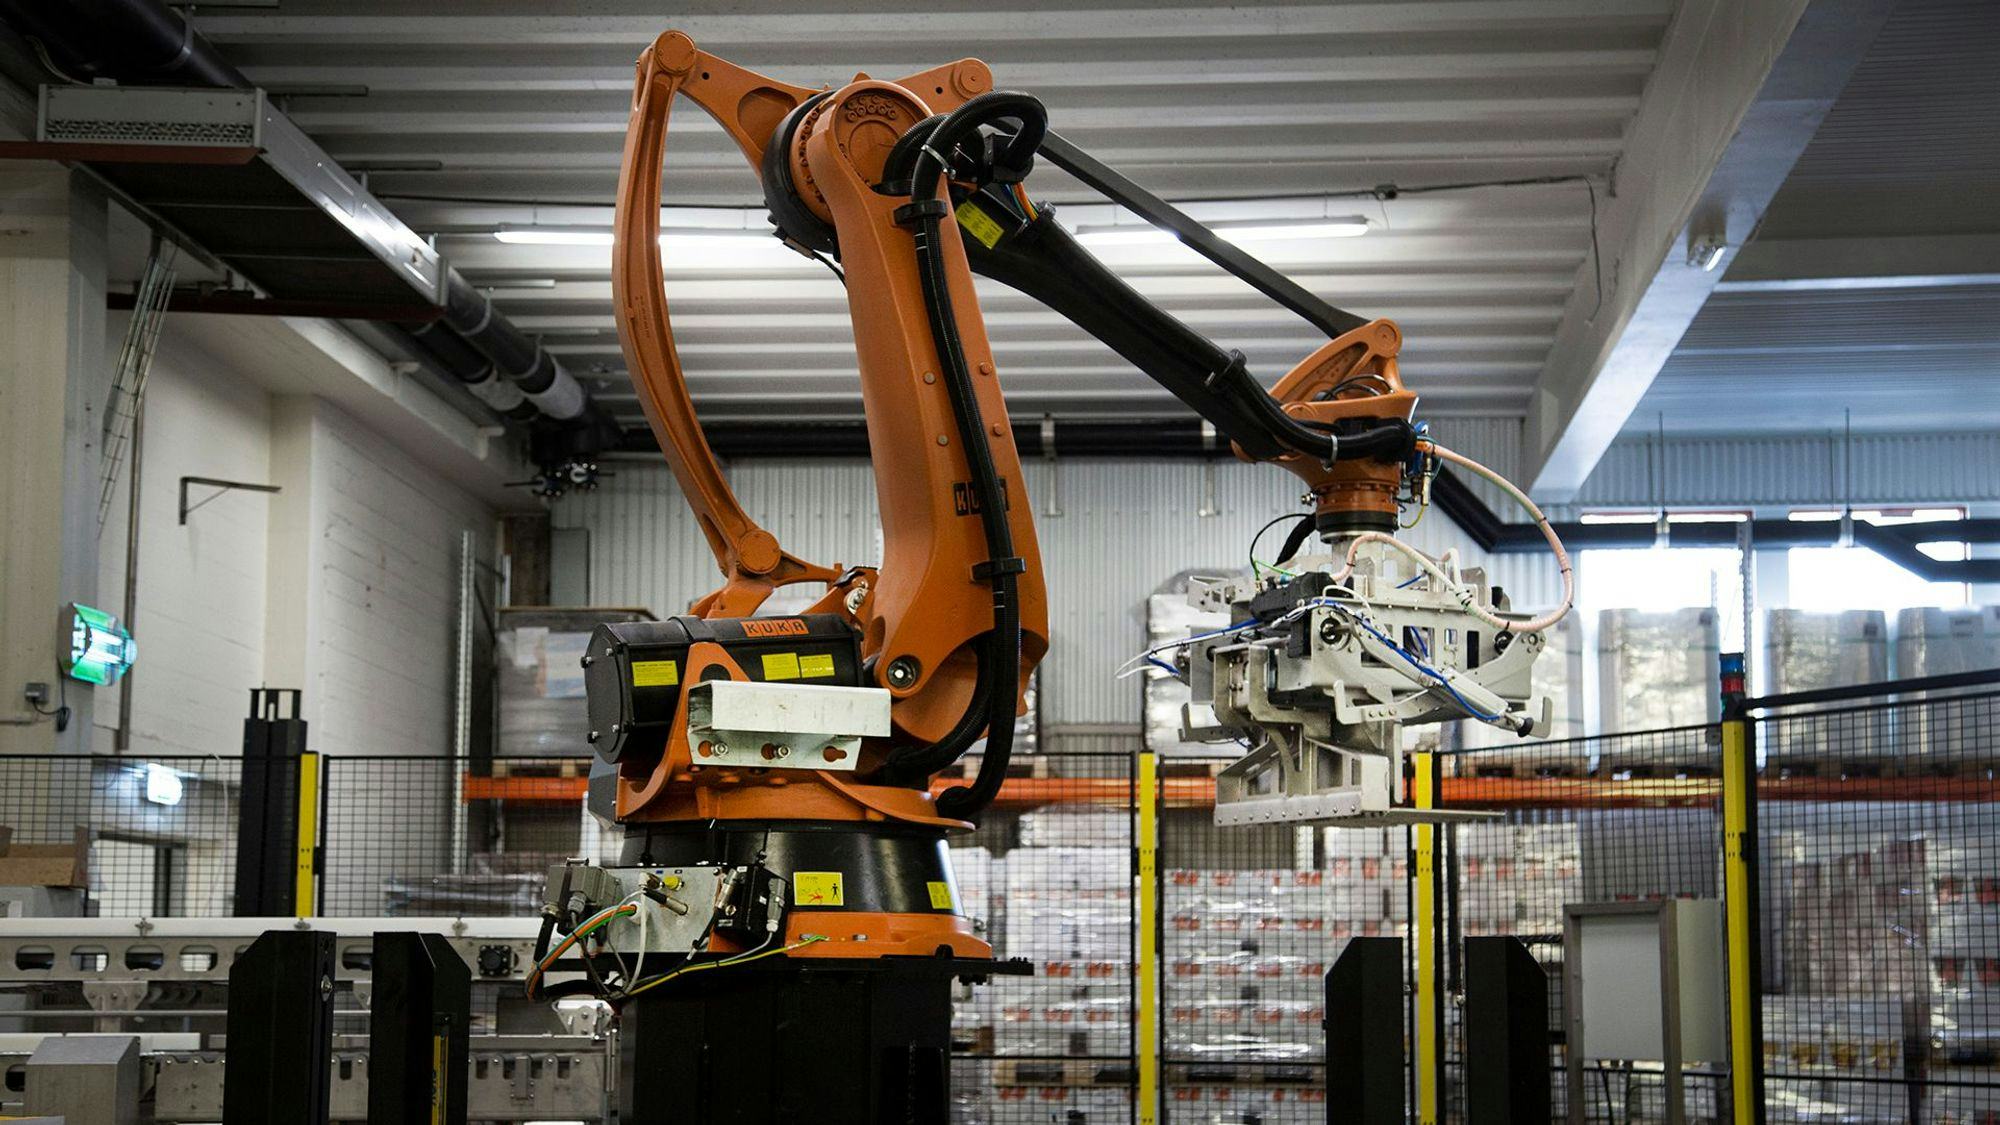 Factory orange robot at work, located in a warehouse